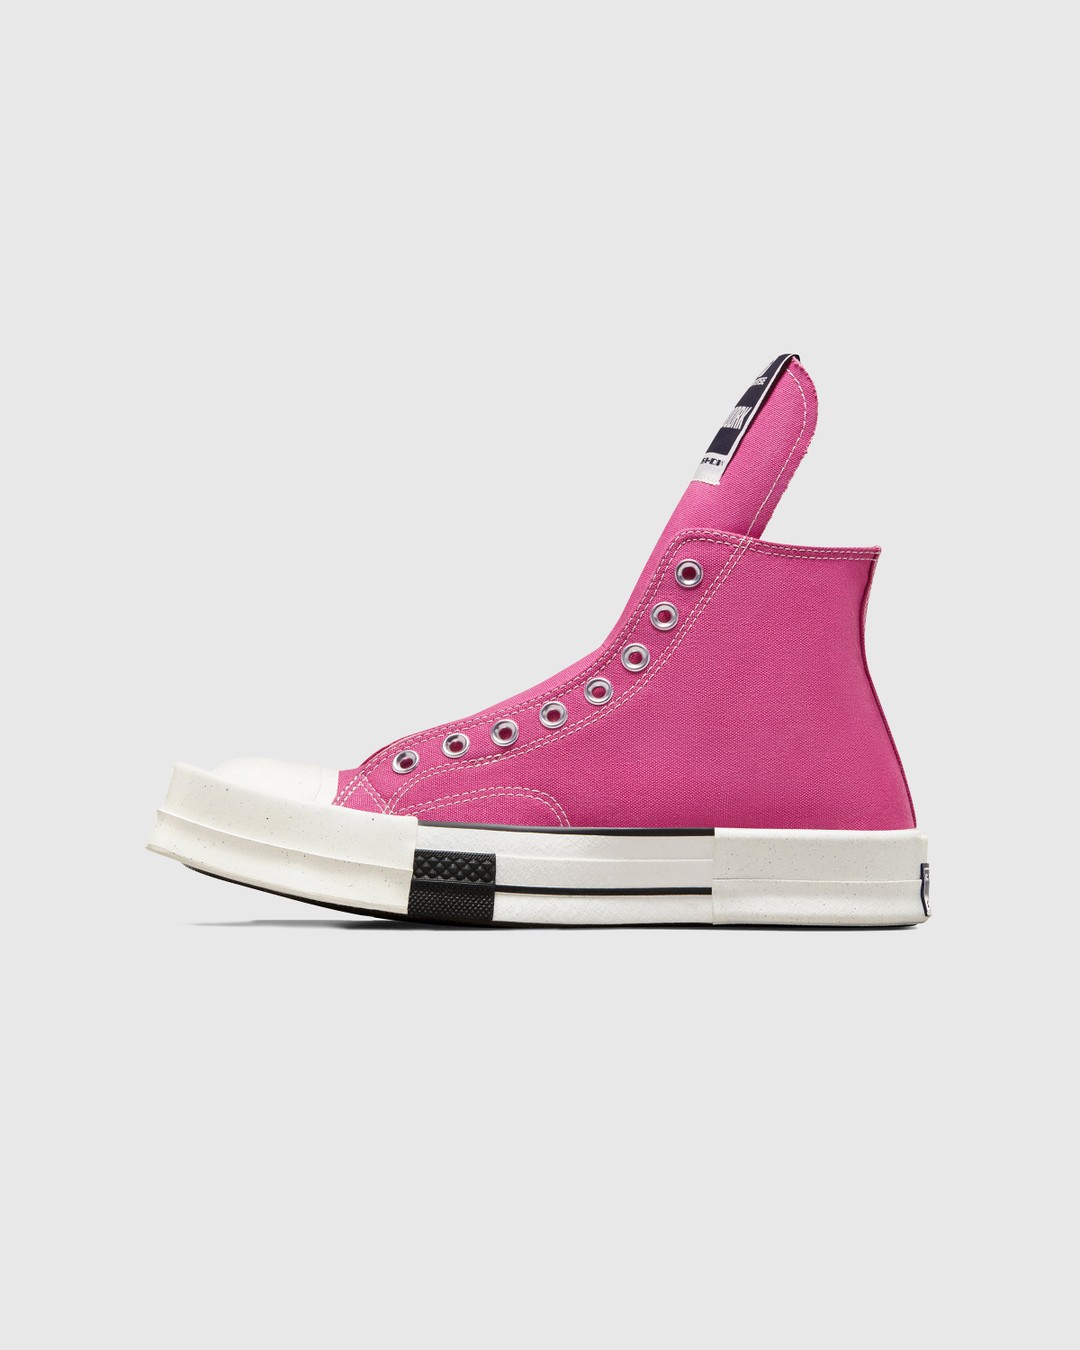 Converse x DRKSHDW – TURBODRK Chuck 70 Laceless Hi Pink - High Top Sneakers - Pink - Image 2